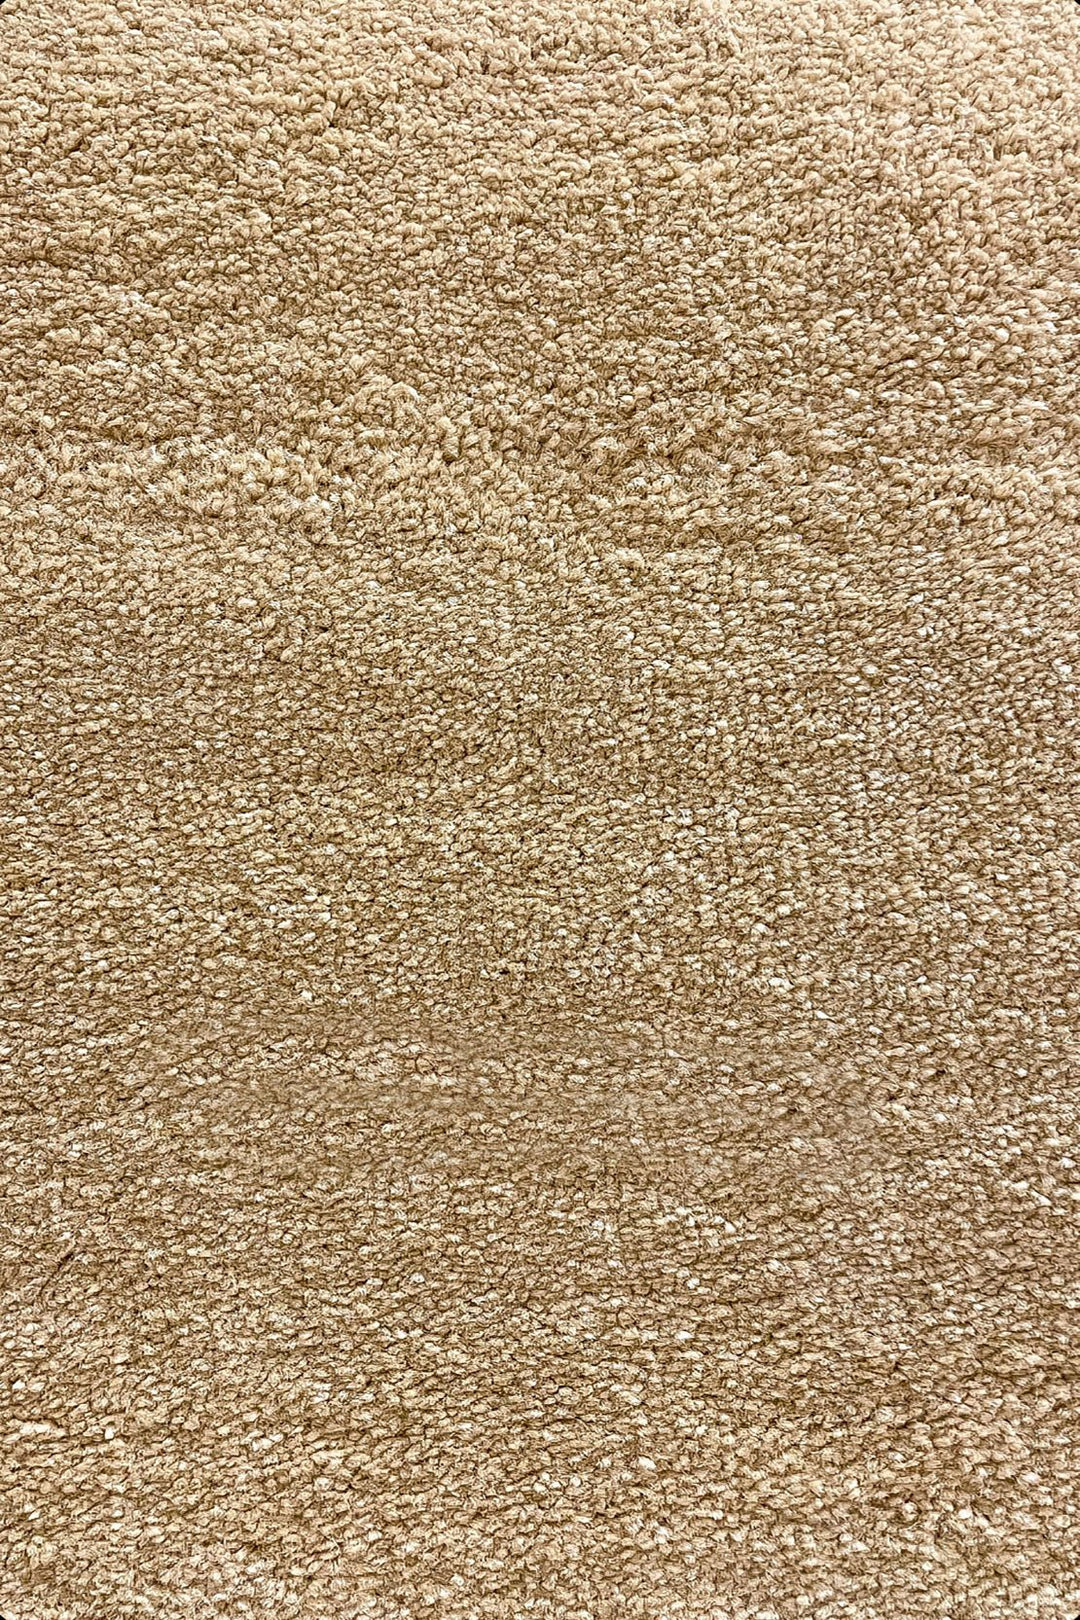 Shangrilla- 12-Foot Wide Wall-to-Wall Carpet, Brown - V Surfaces